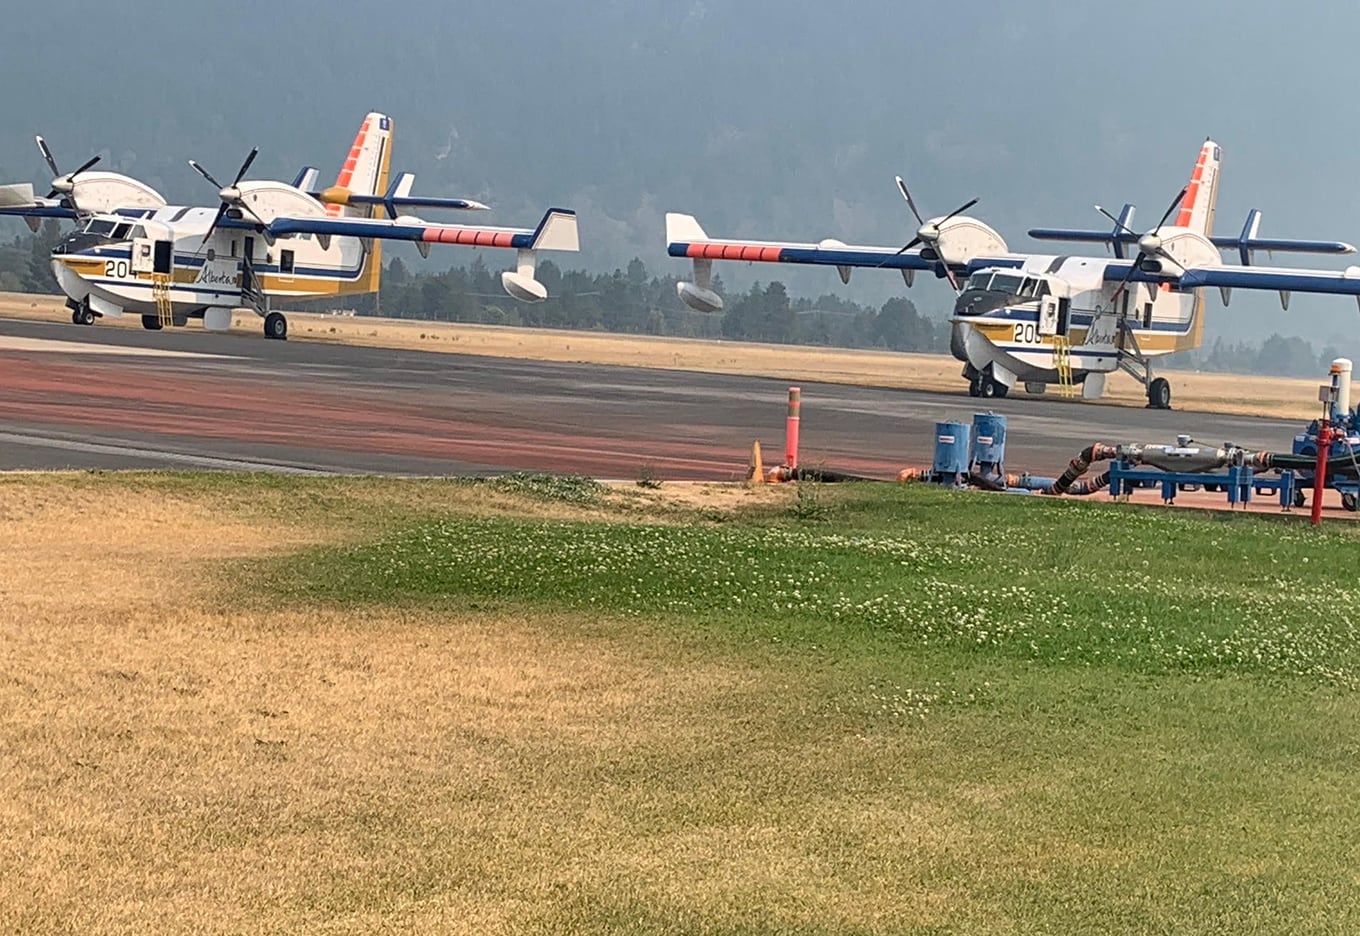 Help has arrived in BC Wildfire fight, with more on the way